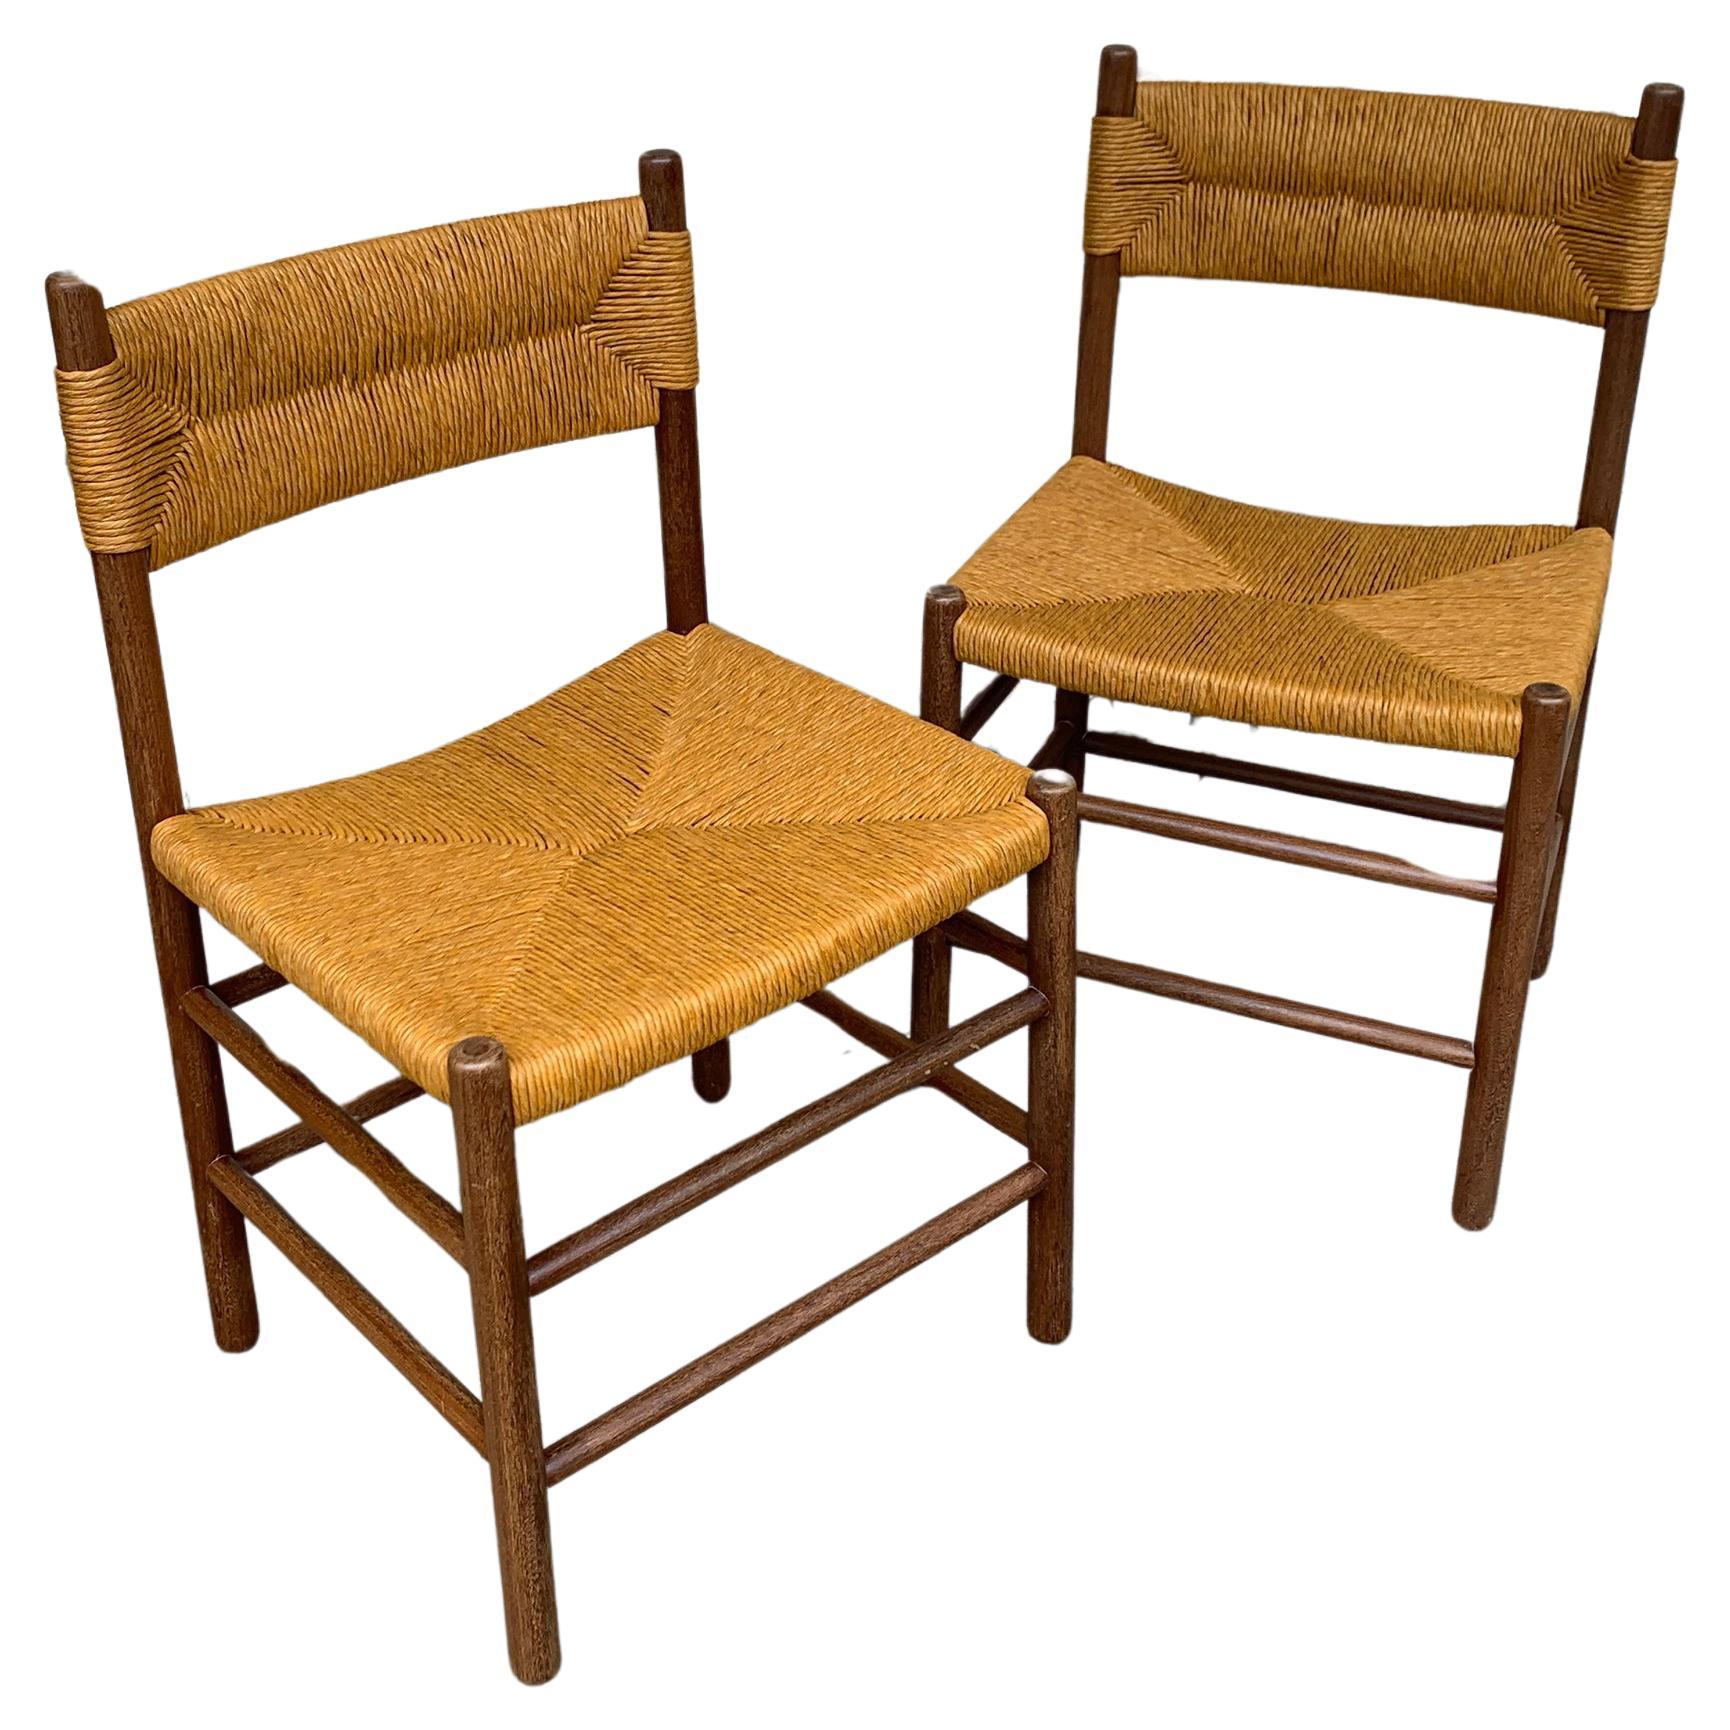 Pair of Midcentury Dordogne Dining Chairs, Charlotte Perriand for Robert Sentou